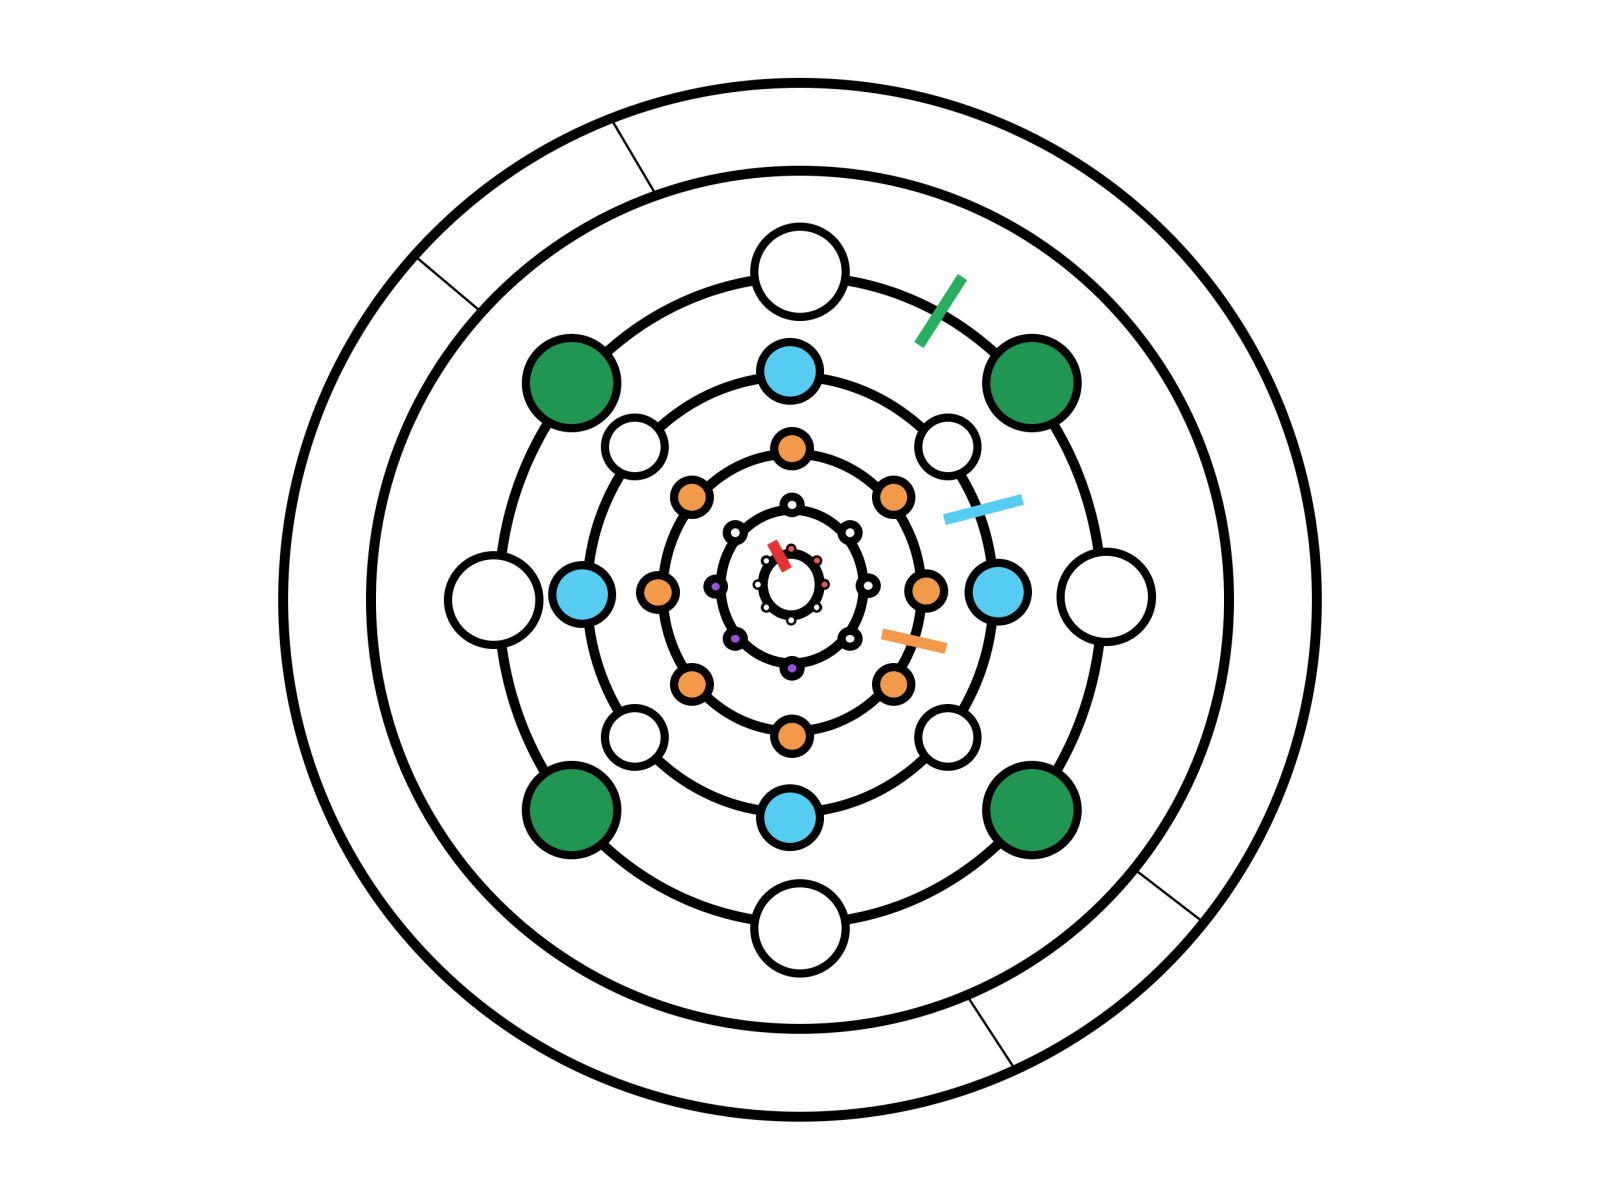 Computer drawn circular interface with more concentric circles within